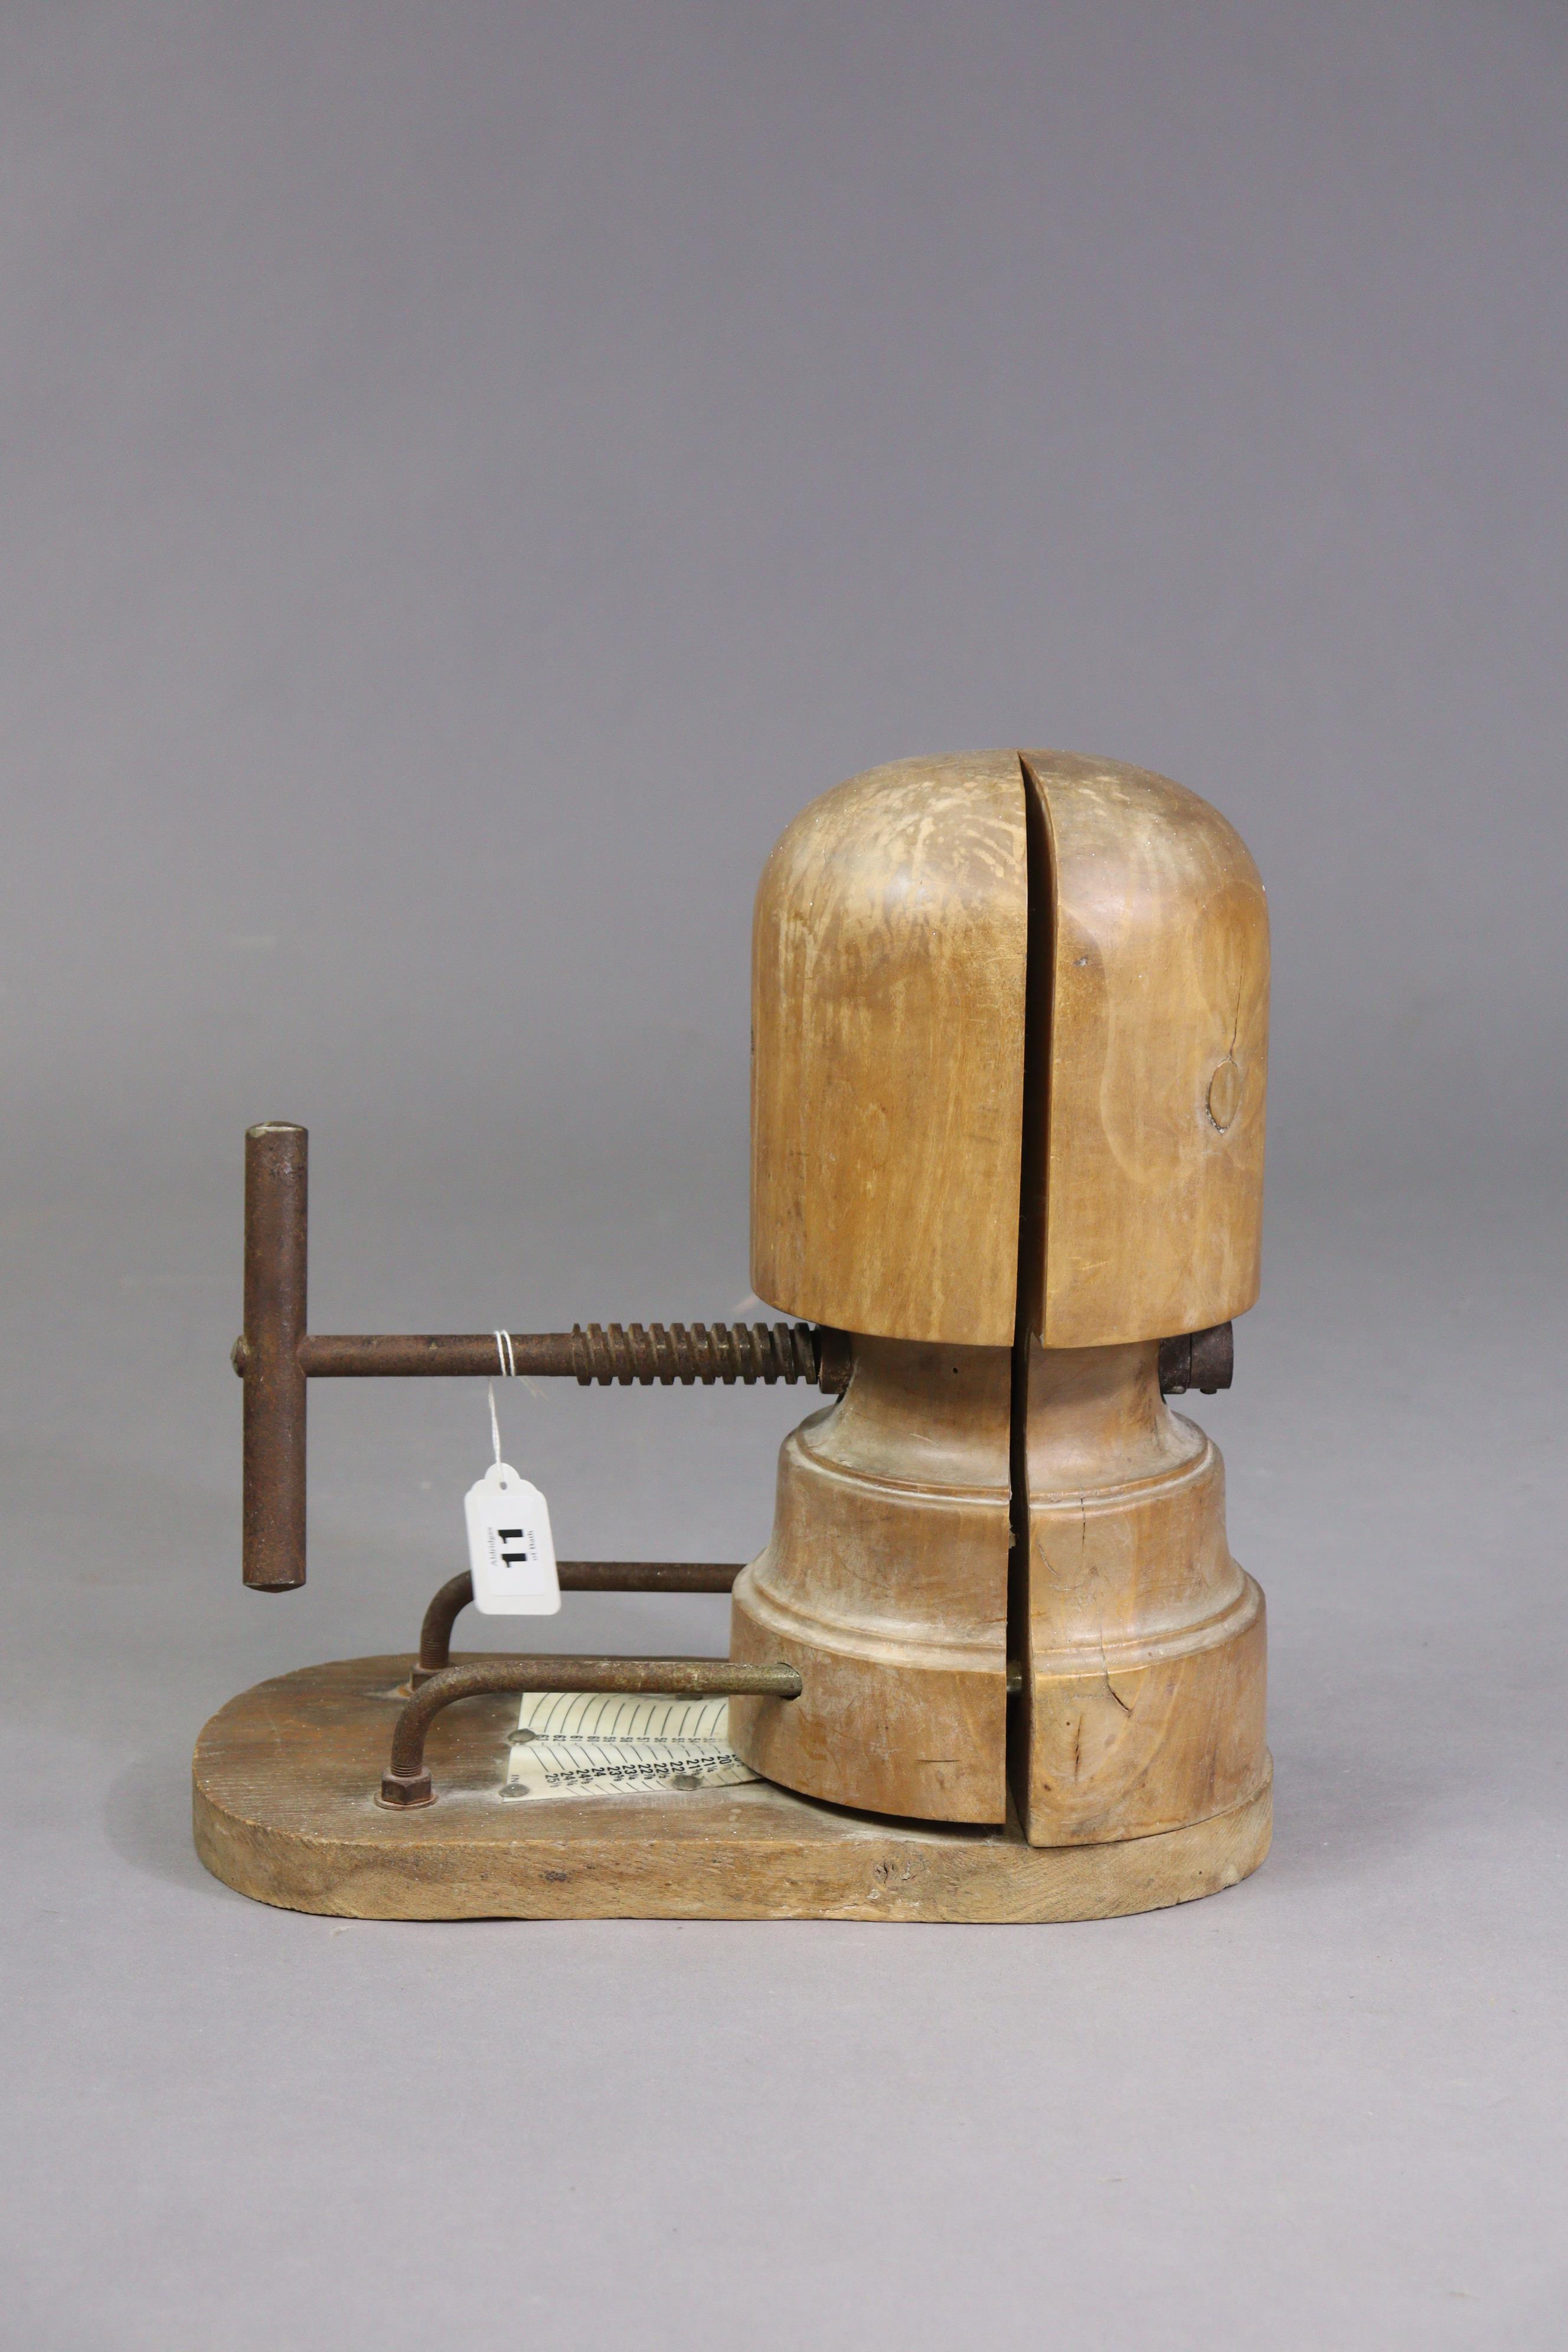 Another late 19th/early 20th century milliner’s wooden adjustable hat stretcher with iron - Image 3 of 3